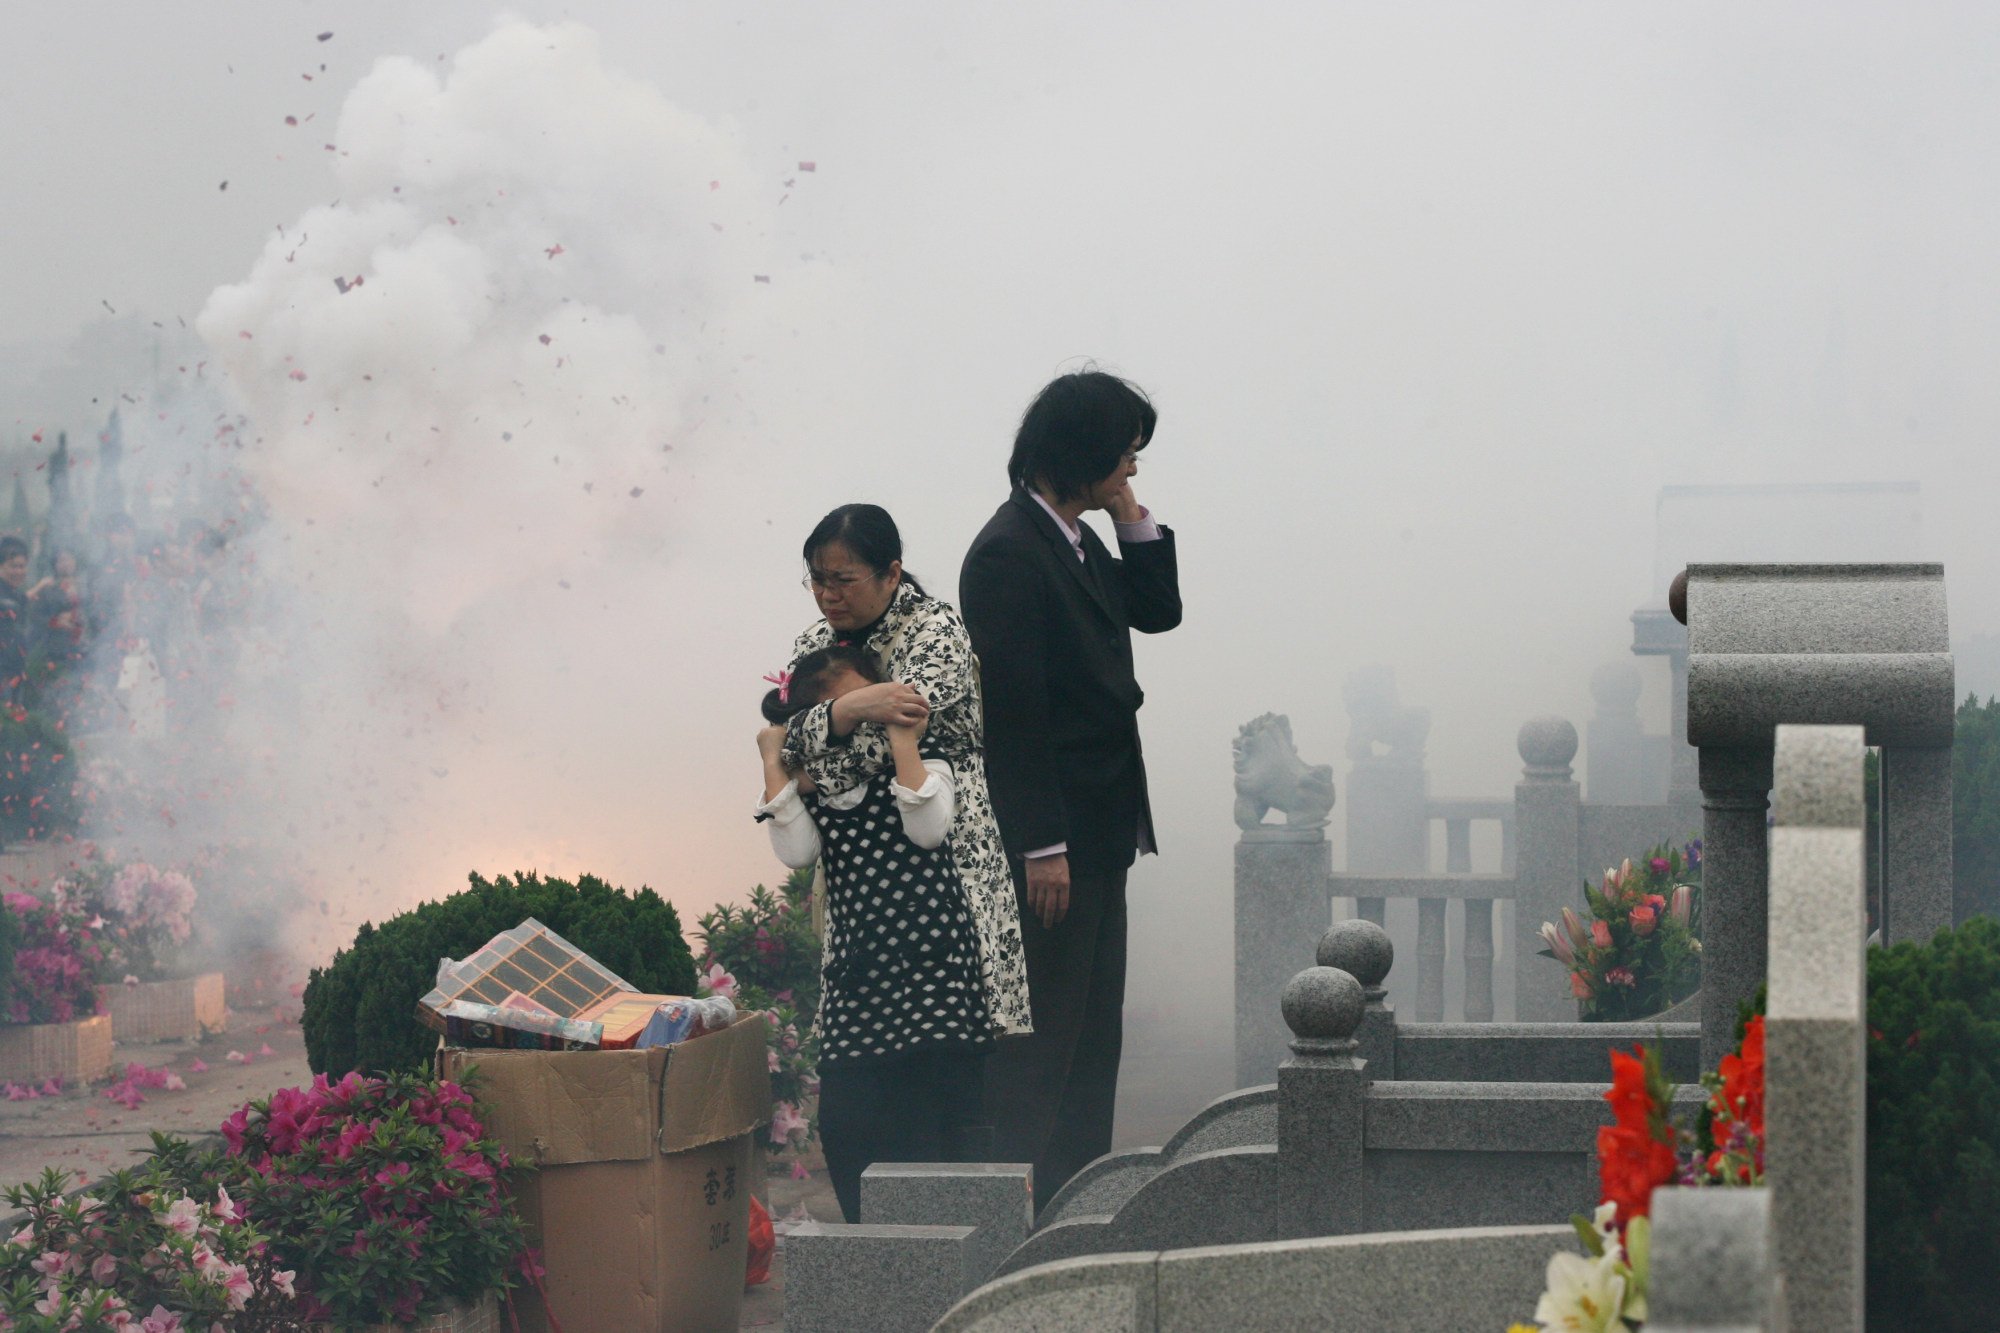 People in Guangdong province pay respects to their relatives during Ching Ming Festival. Photo: SCMP